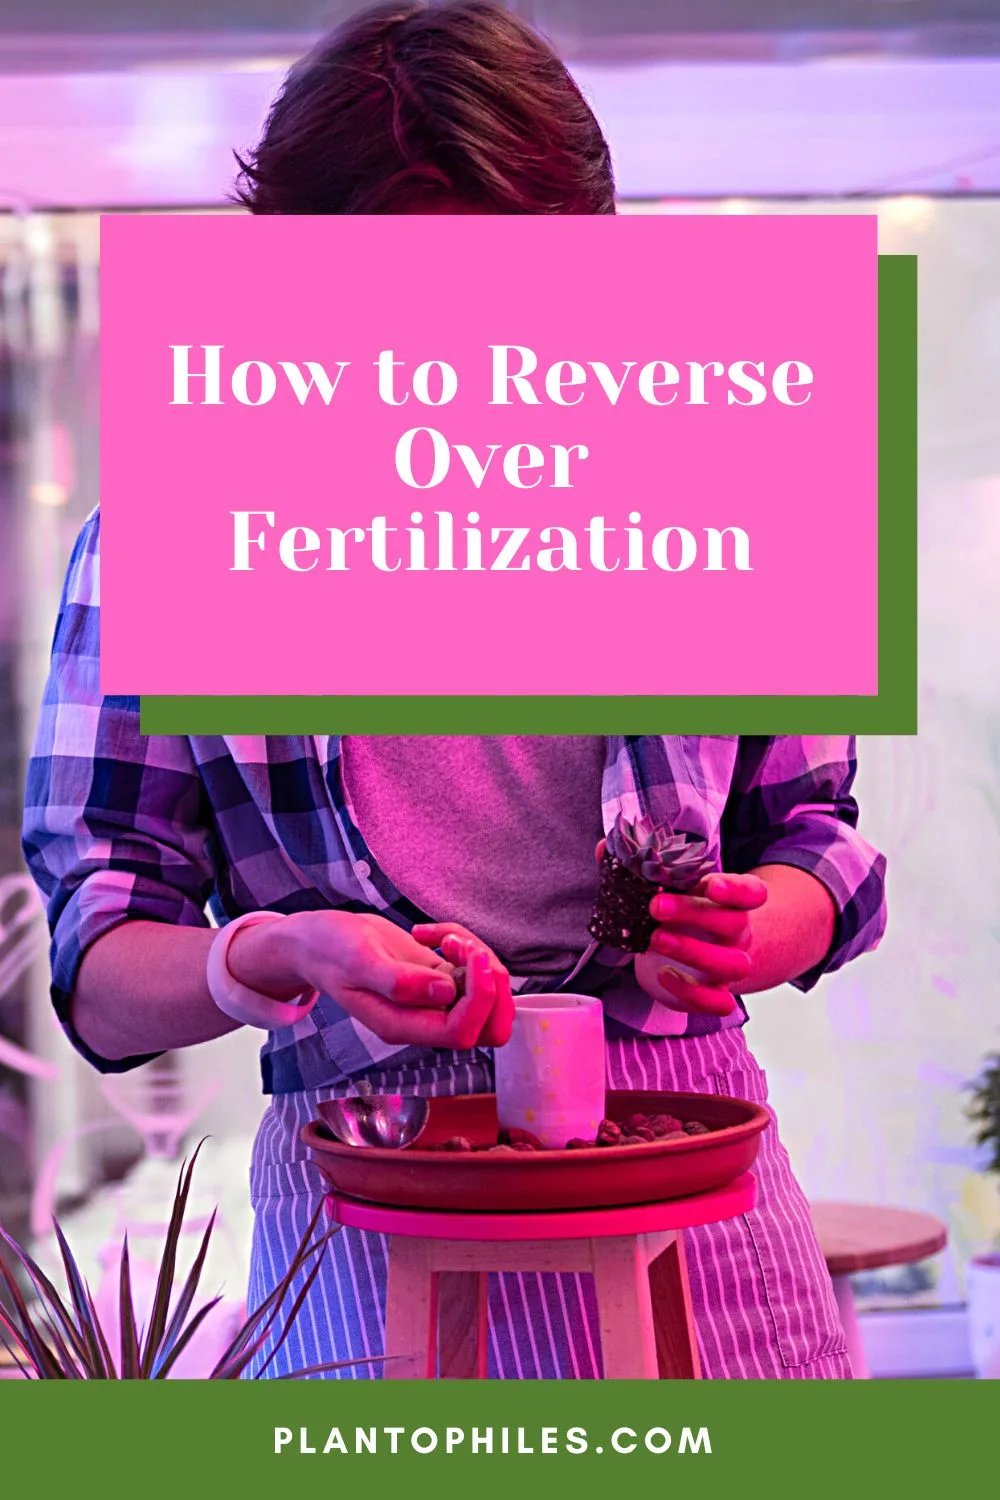 How to Reverse Over Fertilization